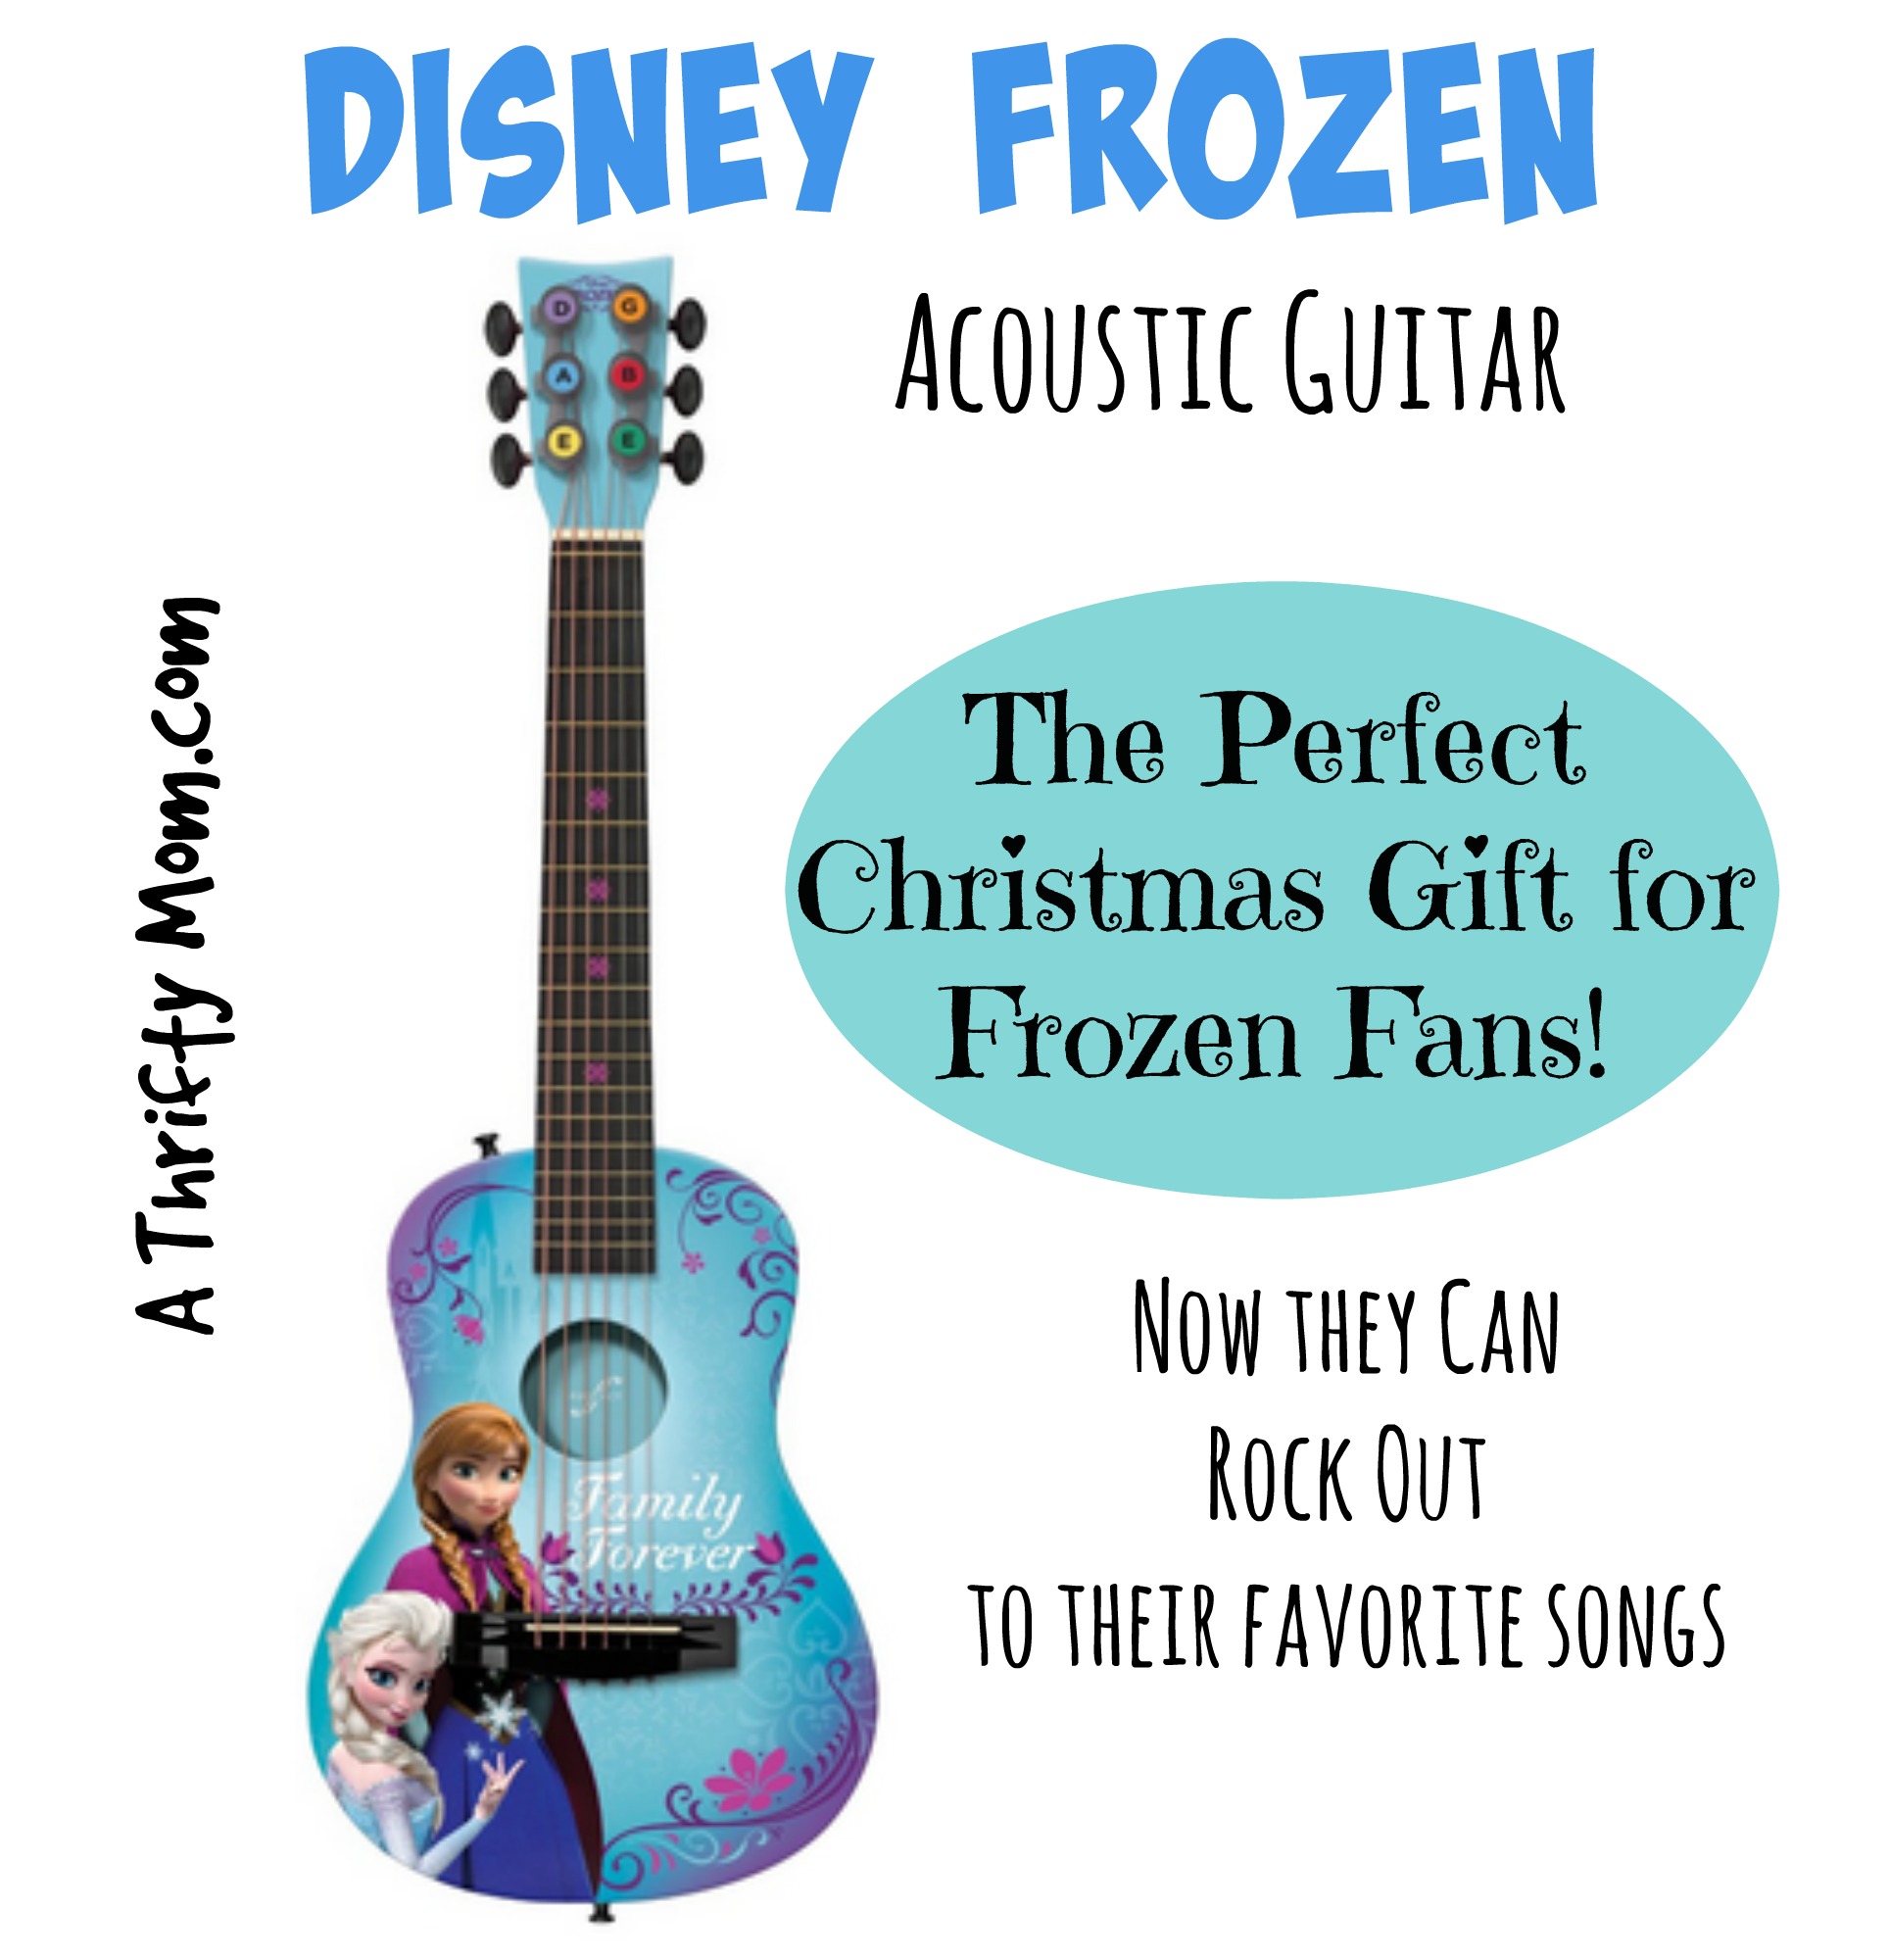 Disney Frozen Acoustic Guitar For Kids - Now they can rock out to their favorite songs! #Frozen #ChristmasGiftForKids